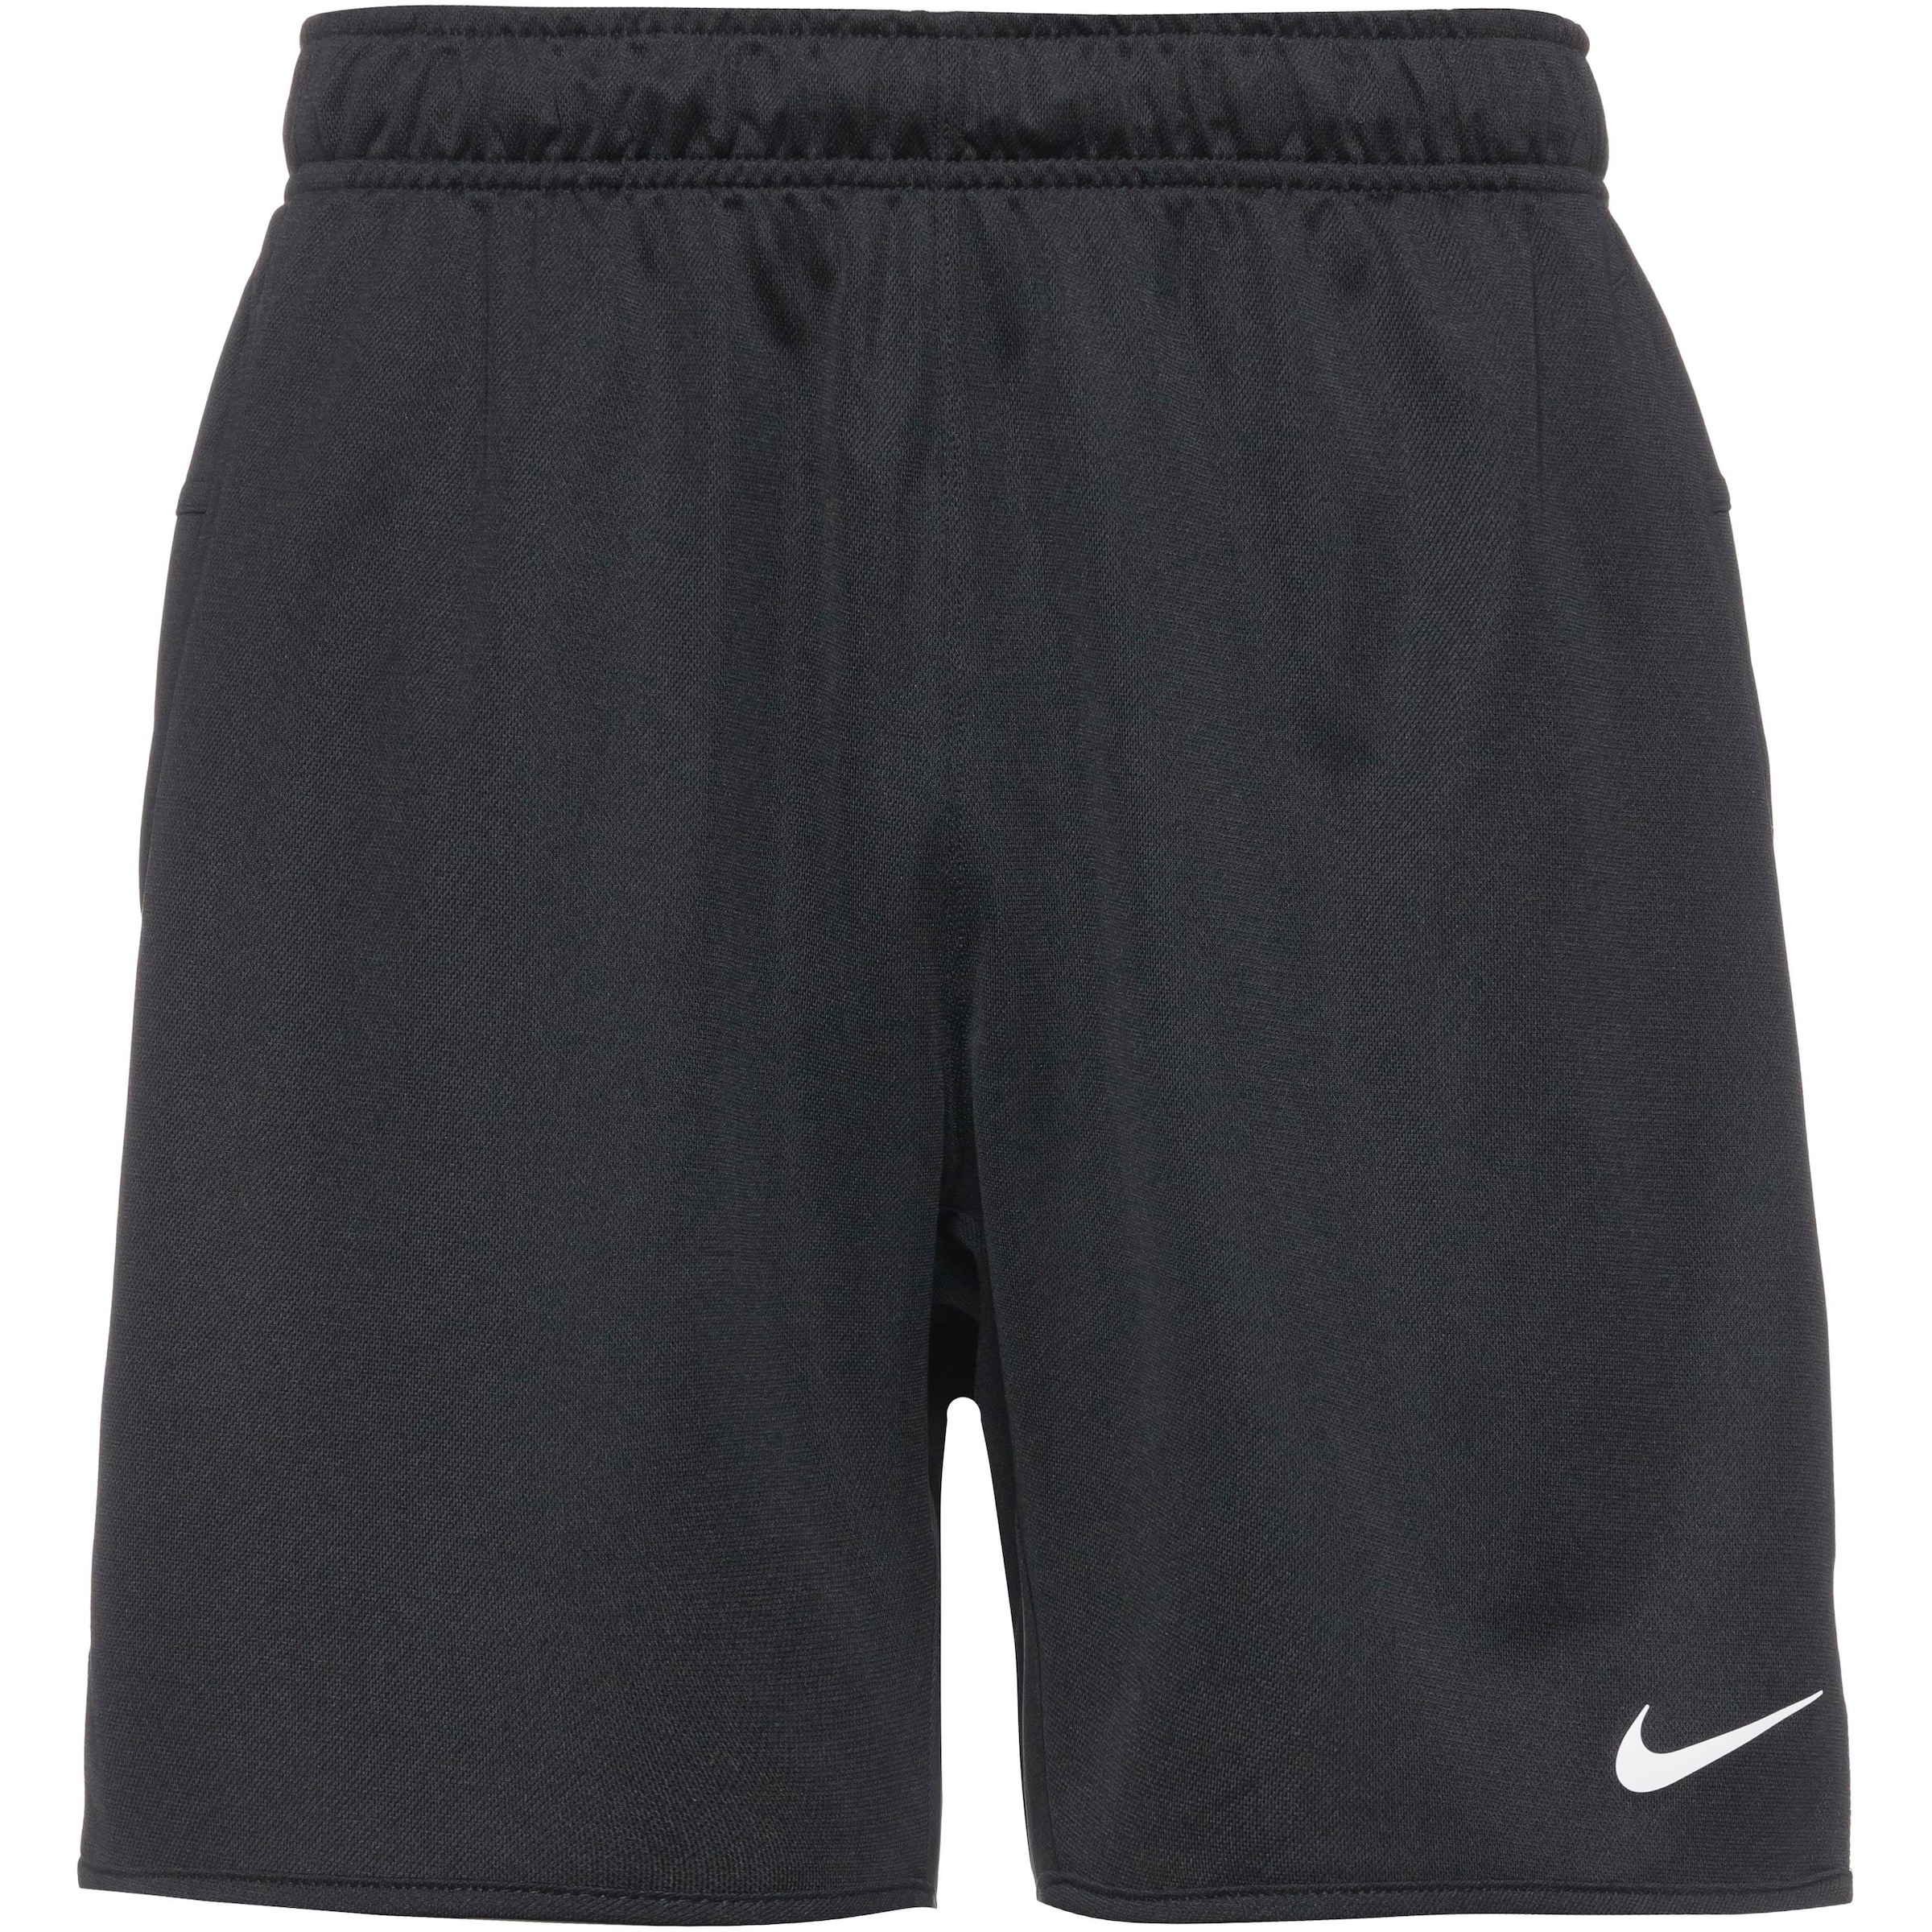 Thigh Length Nike Shorts at Rs 250/piece in Noida | ID: 20704336262